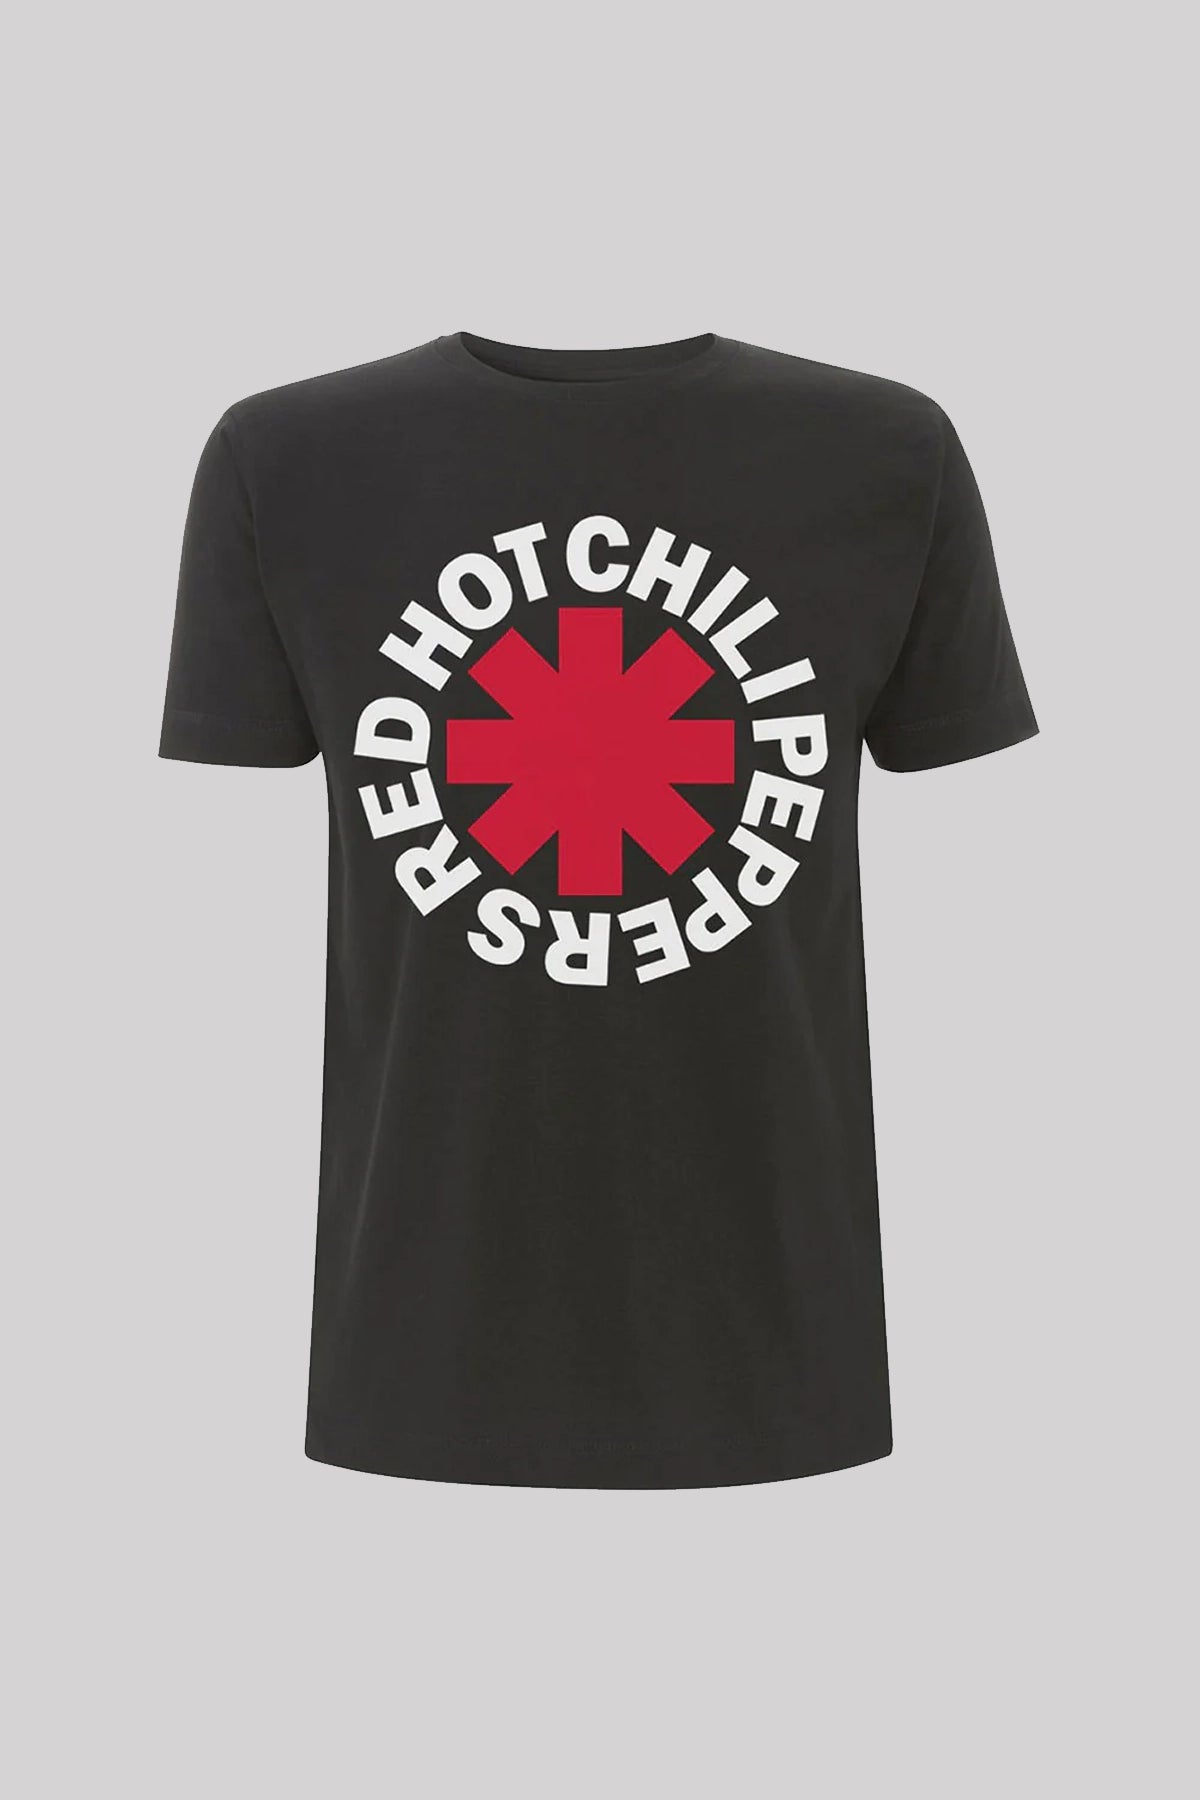 Red Hot Chilli Peppers Classic Asterisk Unisex T-Shirt